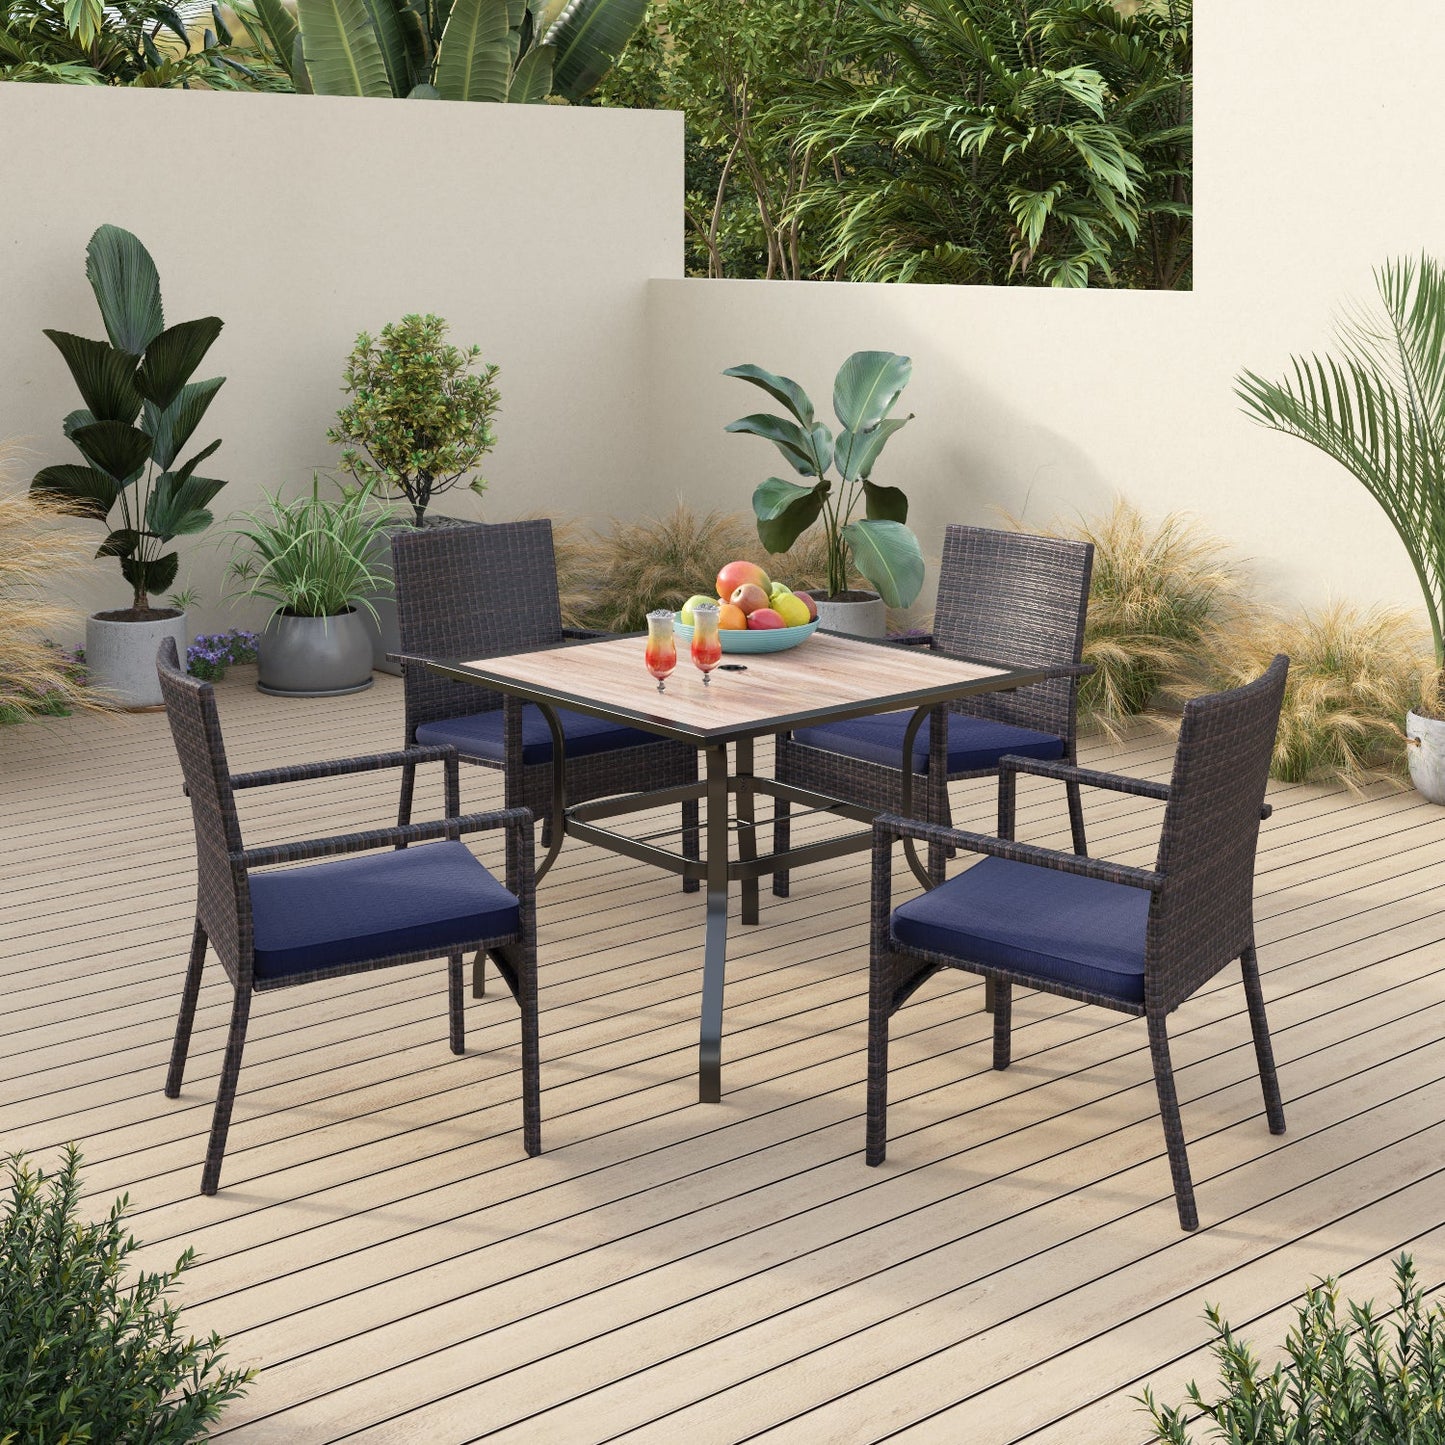 Sophia & William 5 Pieces Outdoor Patio Dining Set Dining Chairs and Metal Dining Table